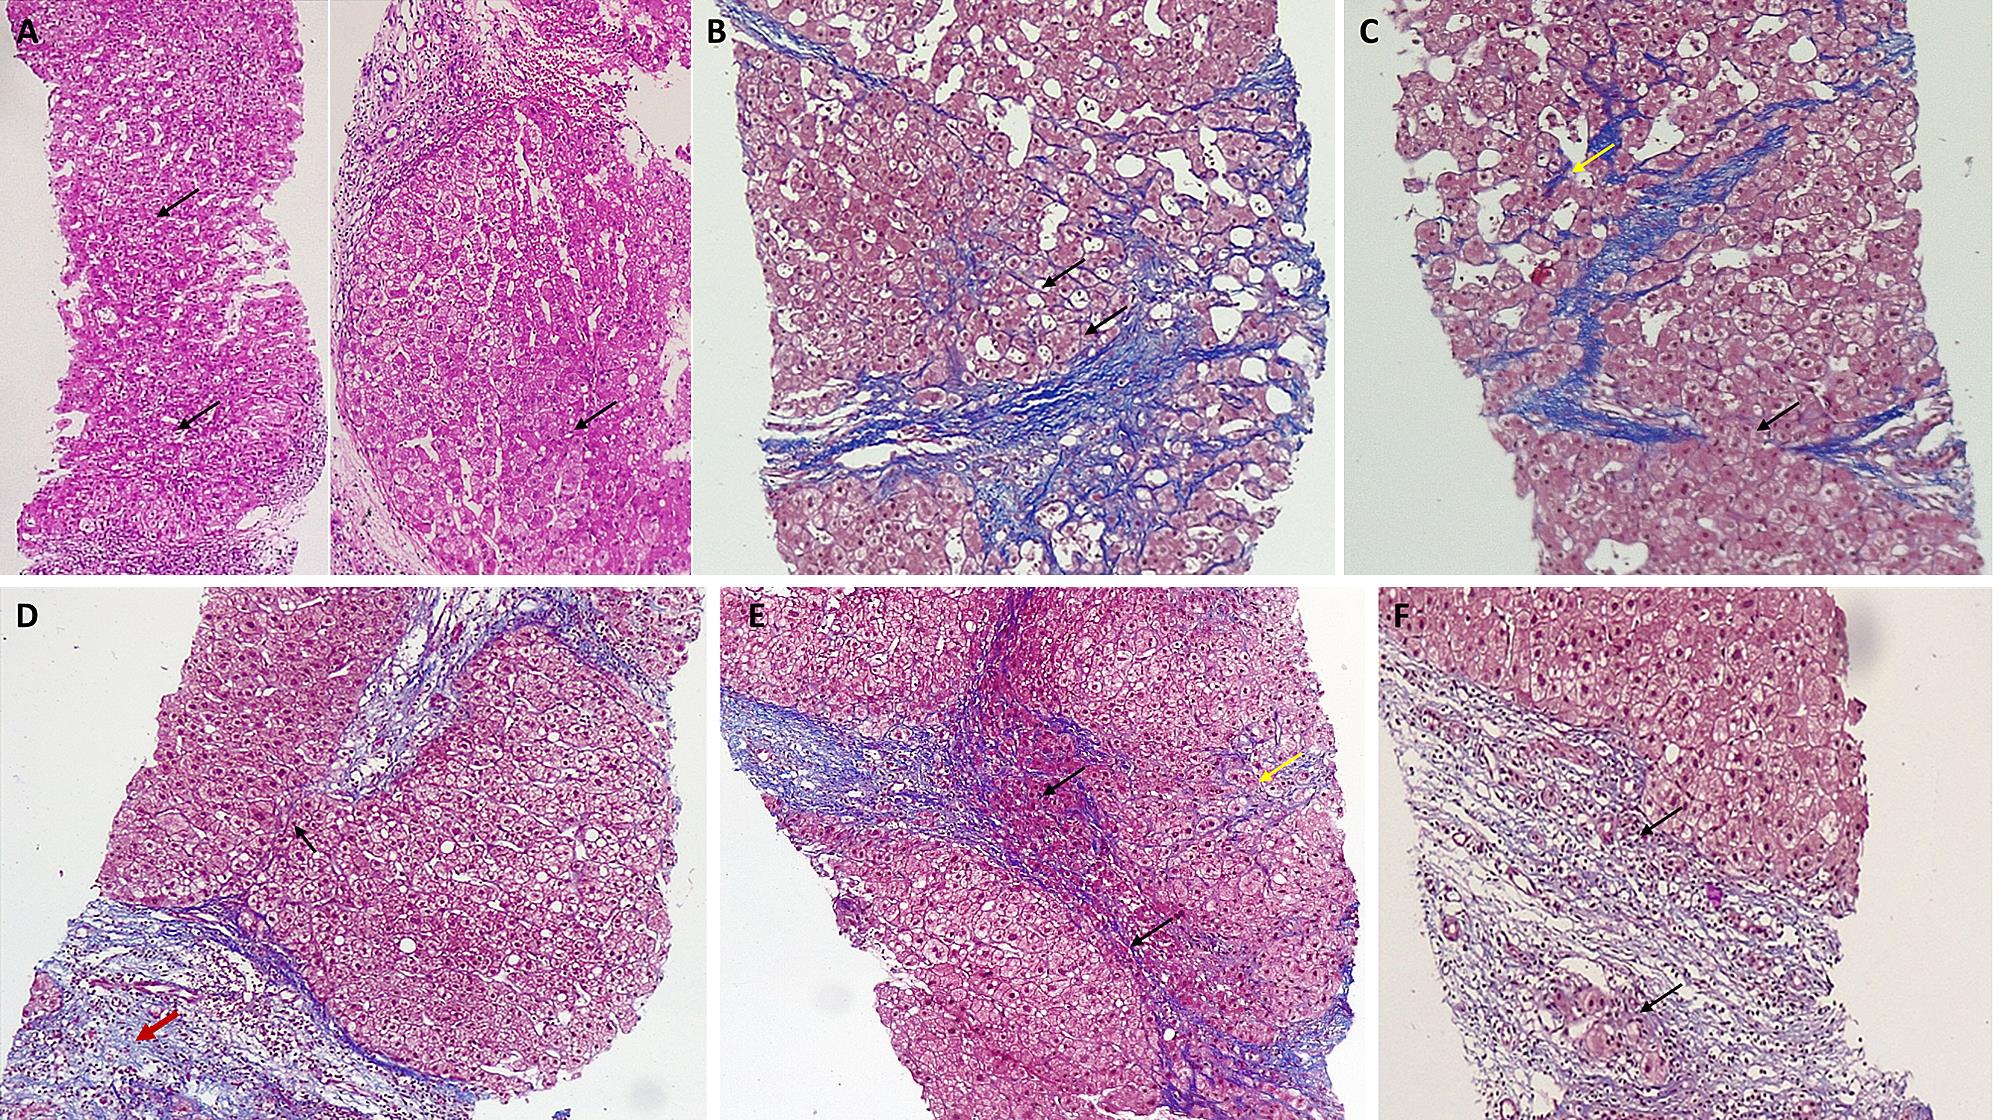 Percutaneous liver biopsy features showing various components of the hepatic repair complex in patients with nonalcoholic steatohepatitis-related cirrhosis after a 12-week course of pirfenidone.